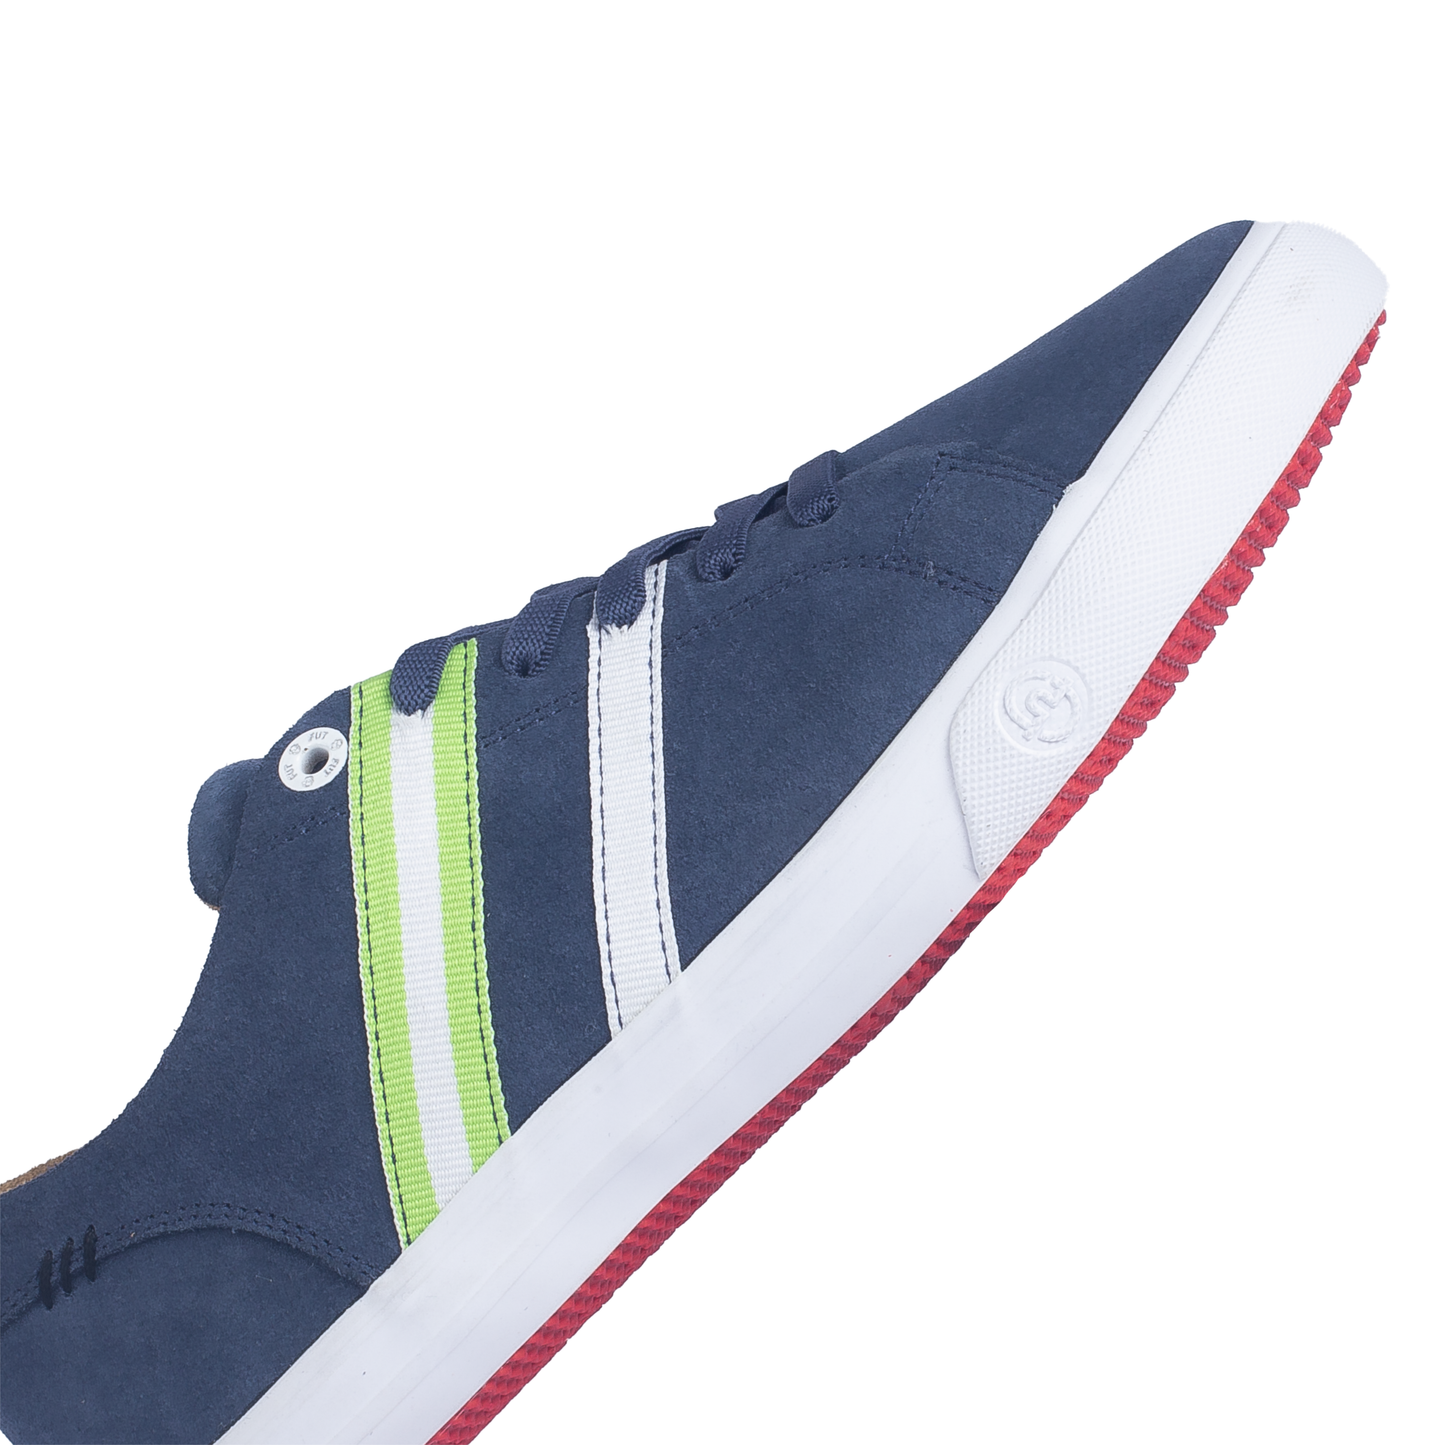 Walking in Comfort Wide Fit Leather Footwear by FUT in City Collection Bogota Navy Green Grey Strips Detail FUT Emboss Logo on Foxing Rubber View